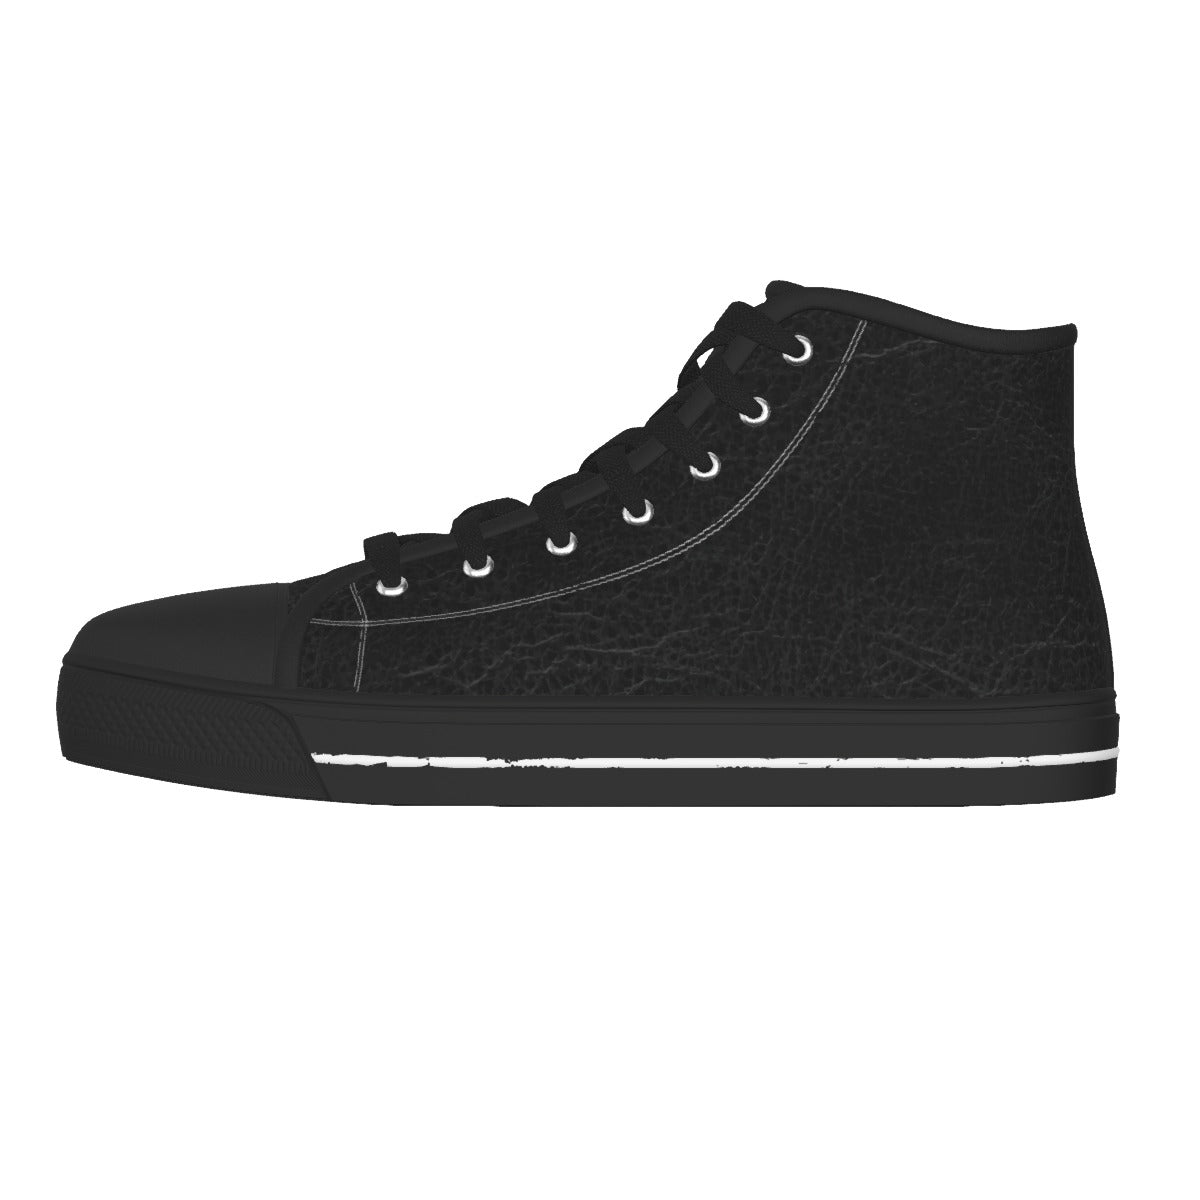 LEATHERTONE [Black](x)SoCal Black Sole Canvas Shoes | CANAANWEAR | Shoes |